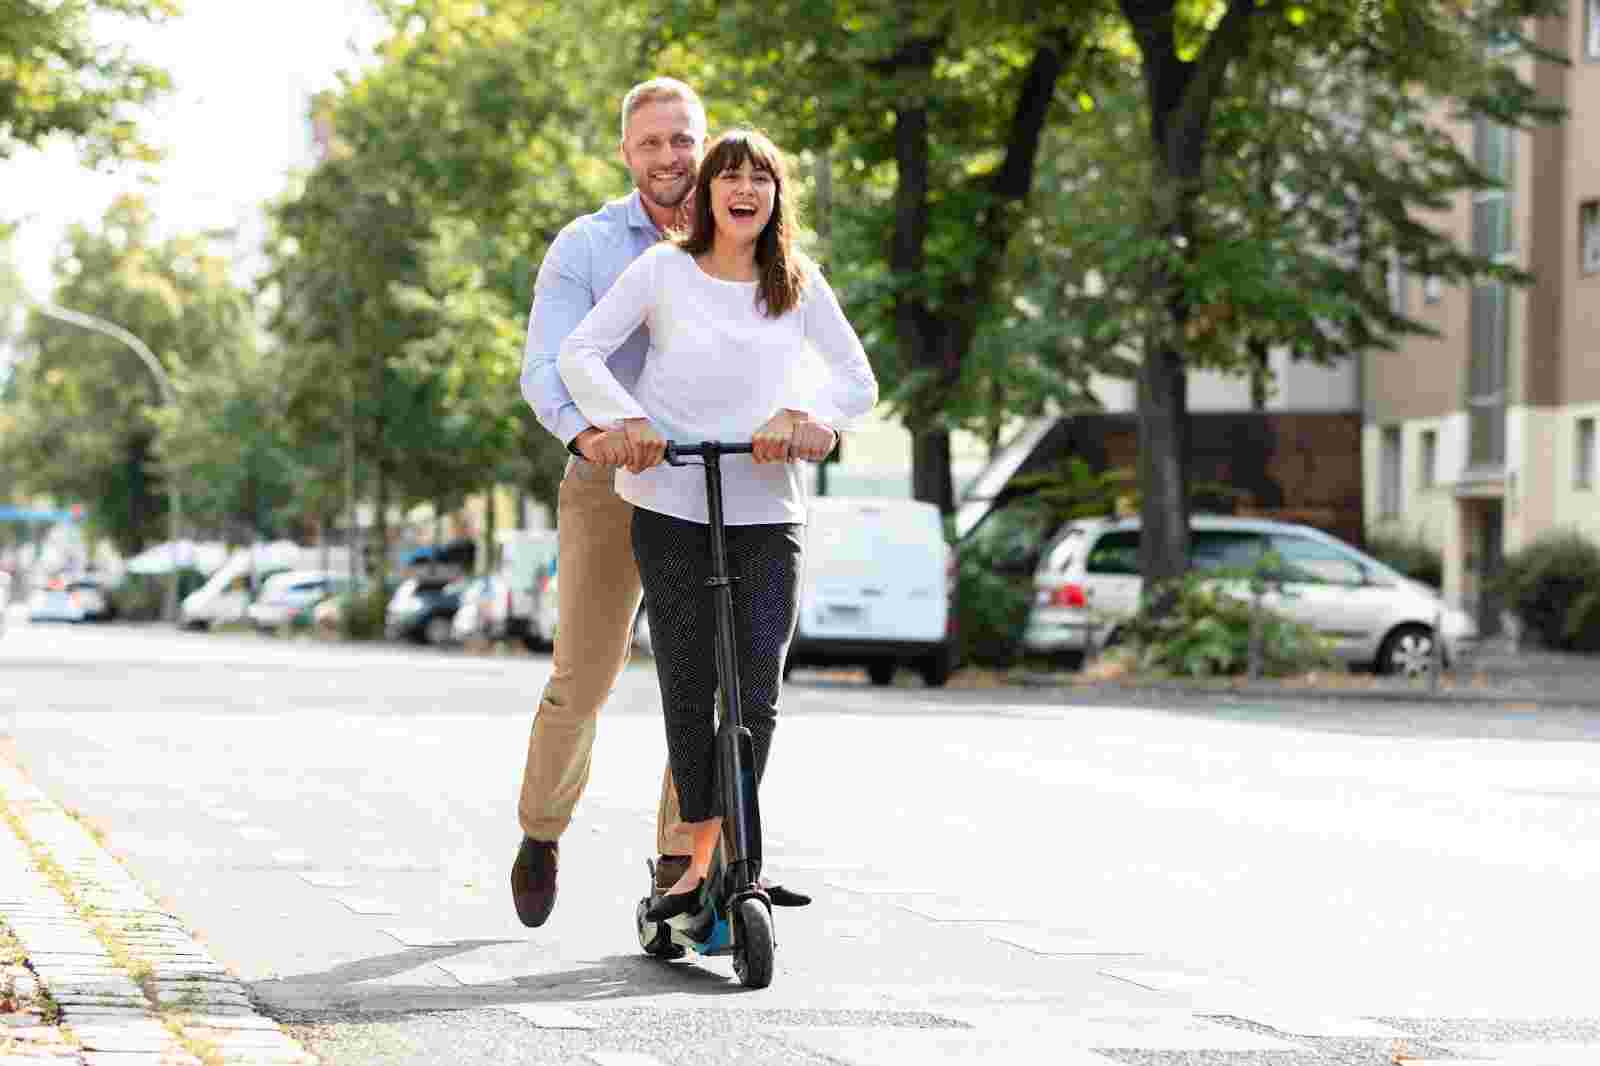 California state law explicitly prohibits carrying a passenger on an electric scooter